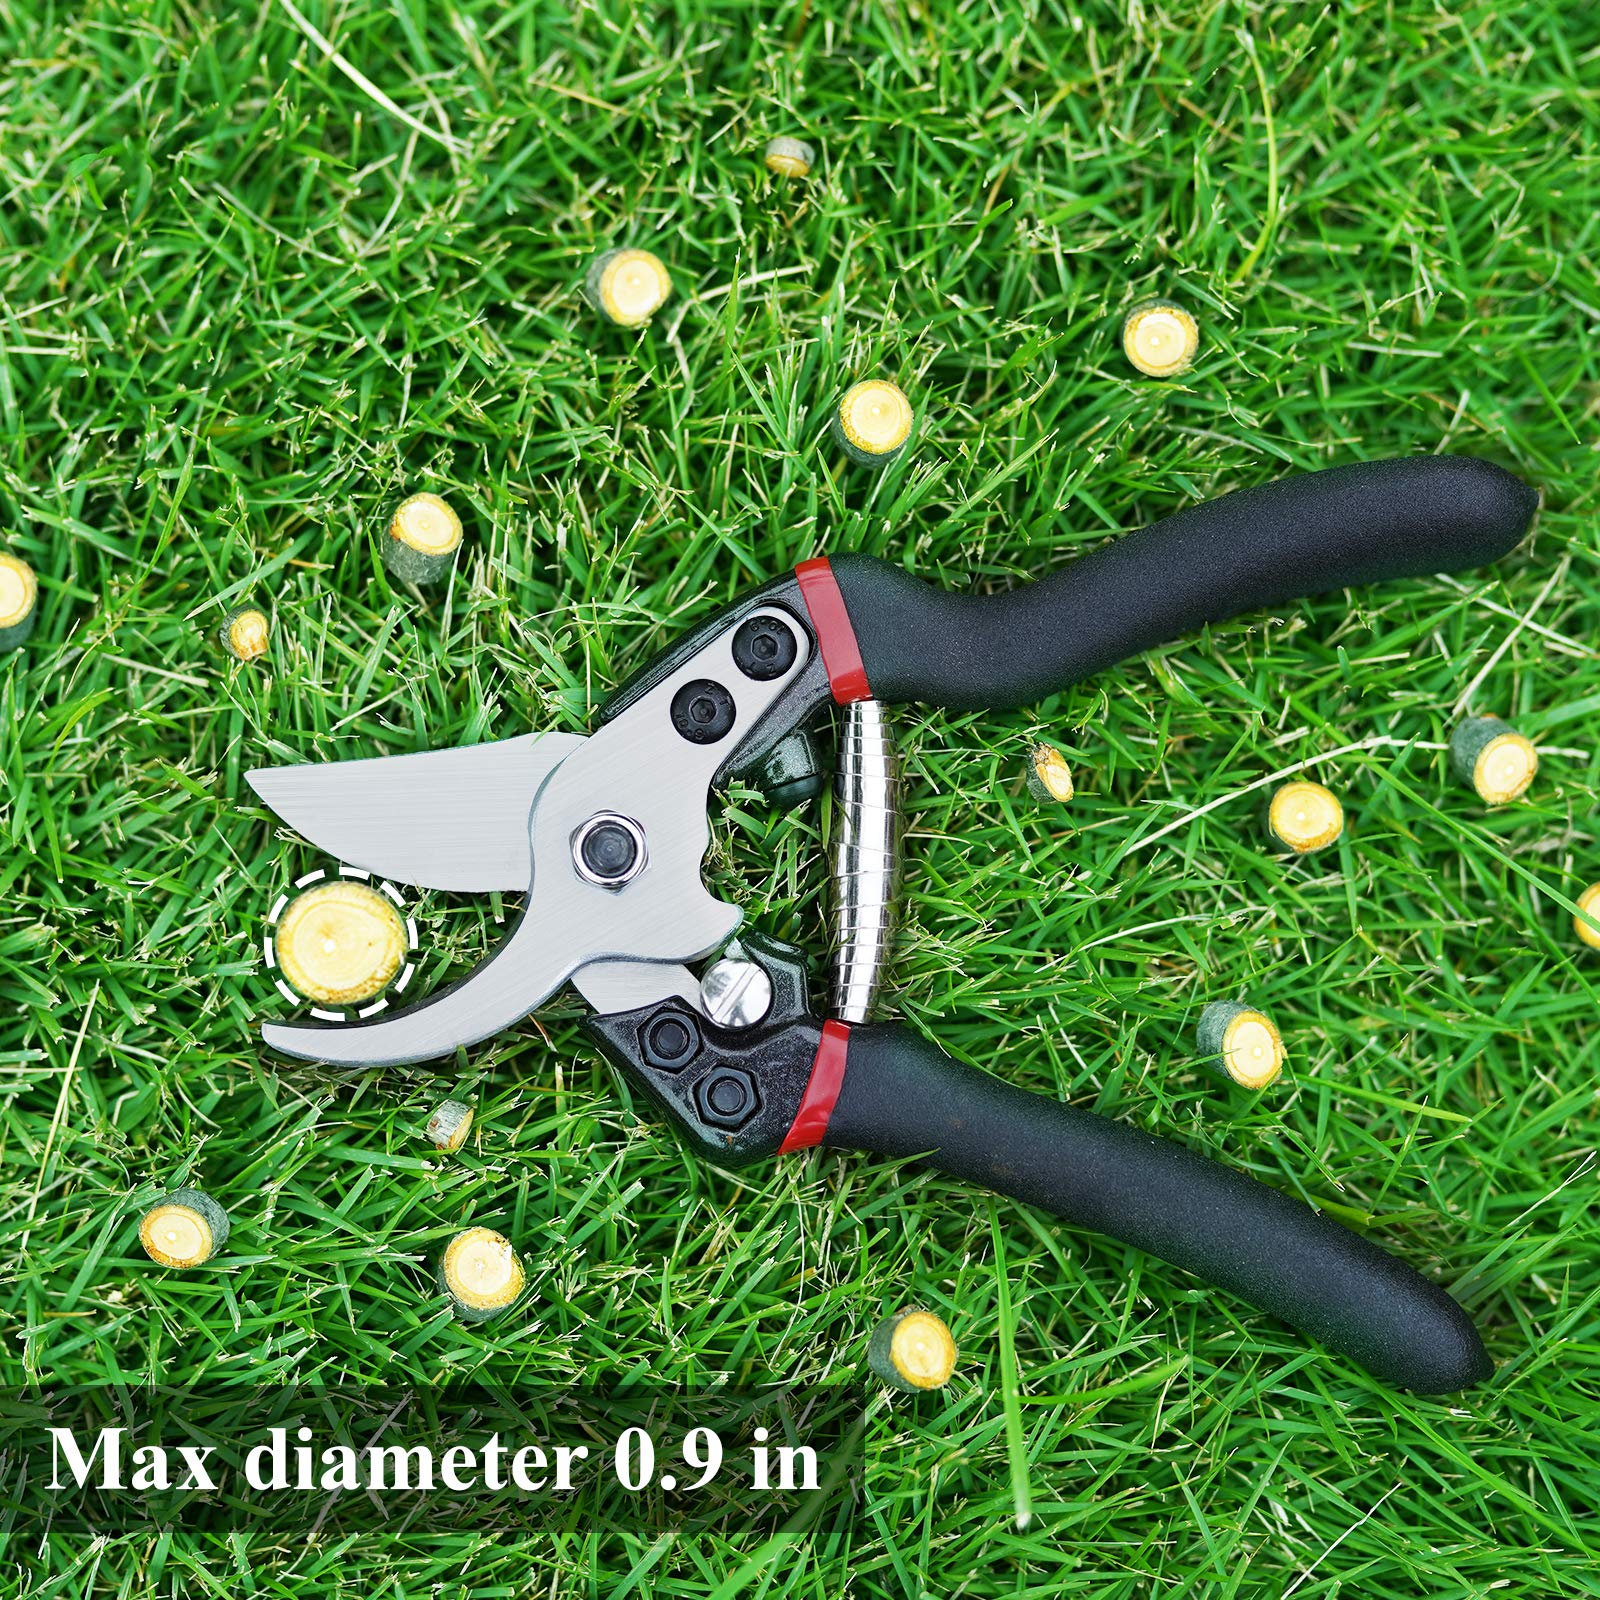 pozzolanas Pruning Shears, 75 garden clippers Plant Scissors Professional Bypass Pruner Tree Branch cutter Plant Trimming Scissors 2 PcS